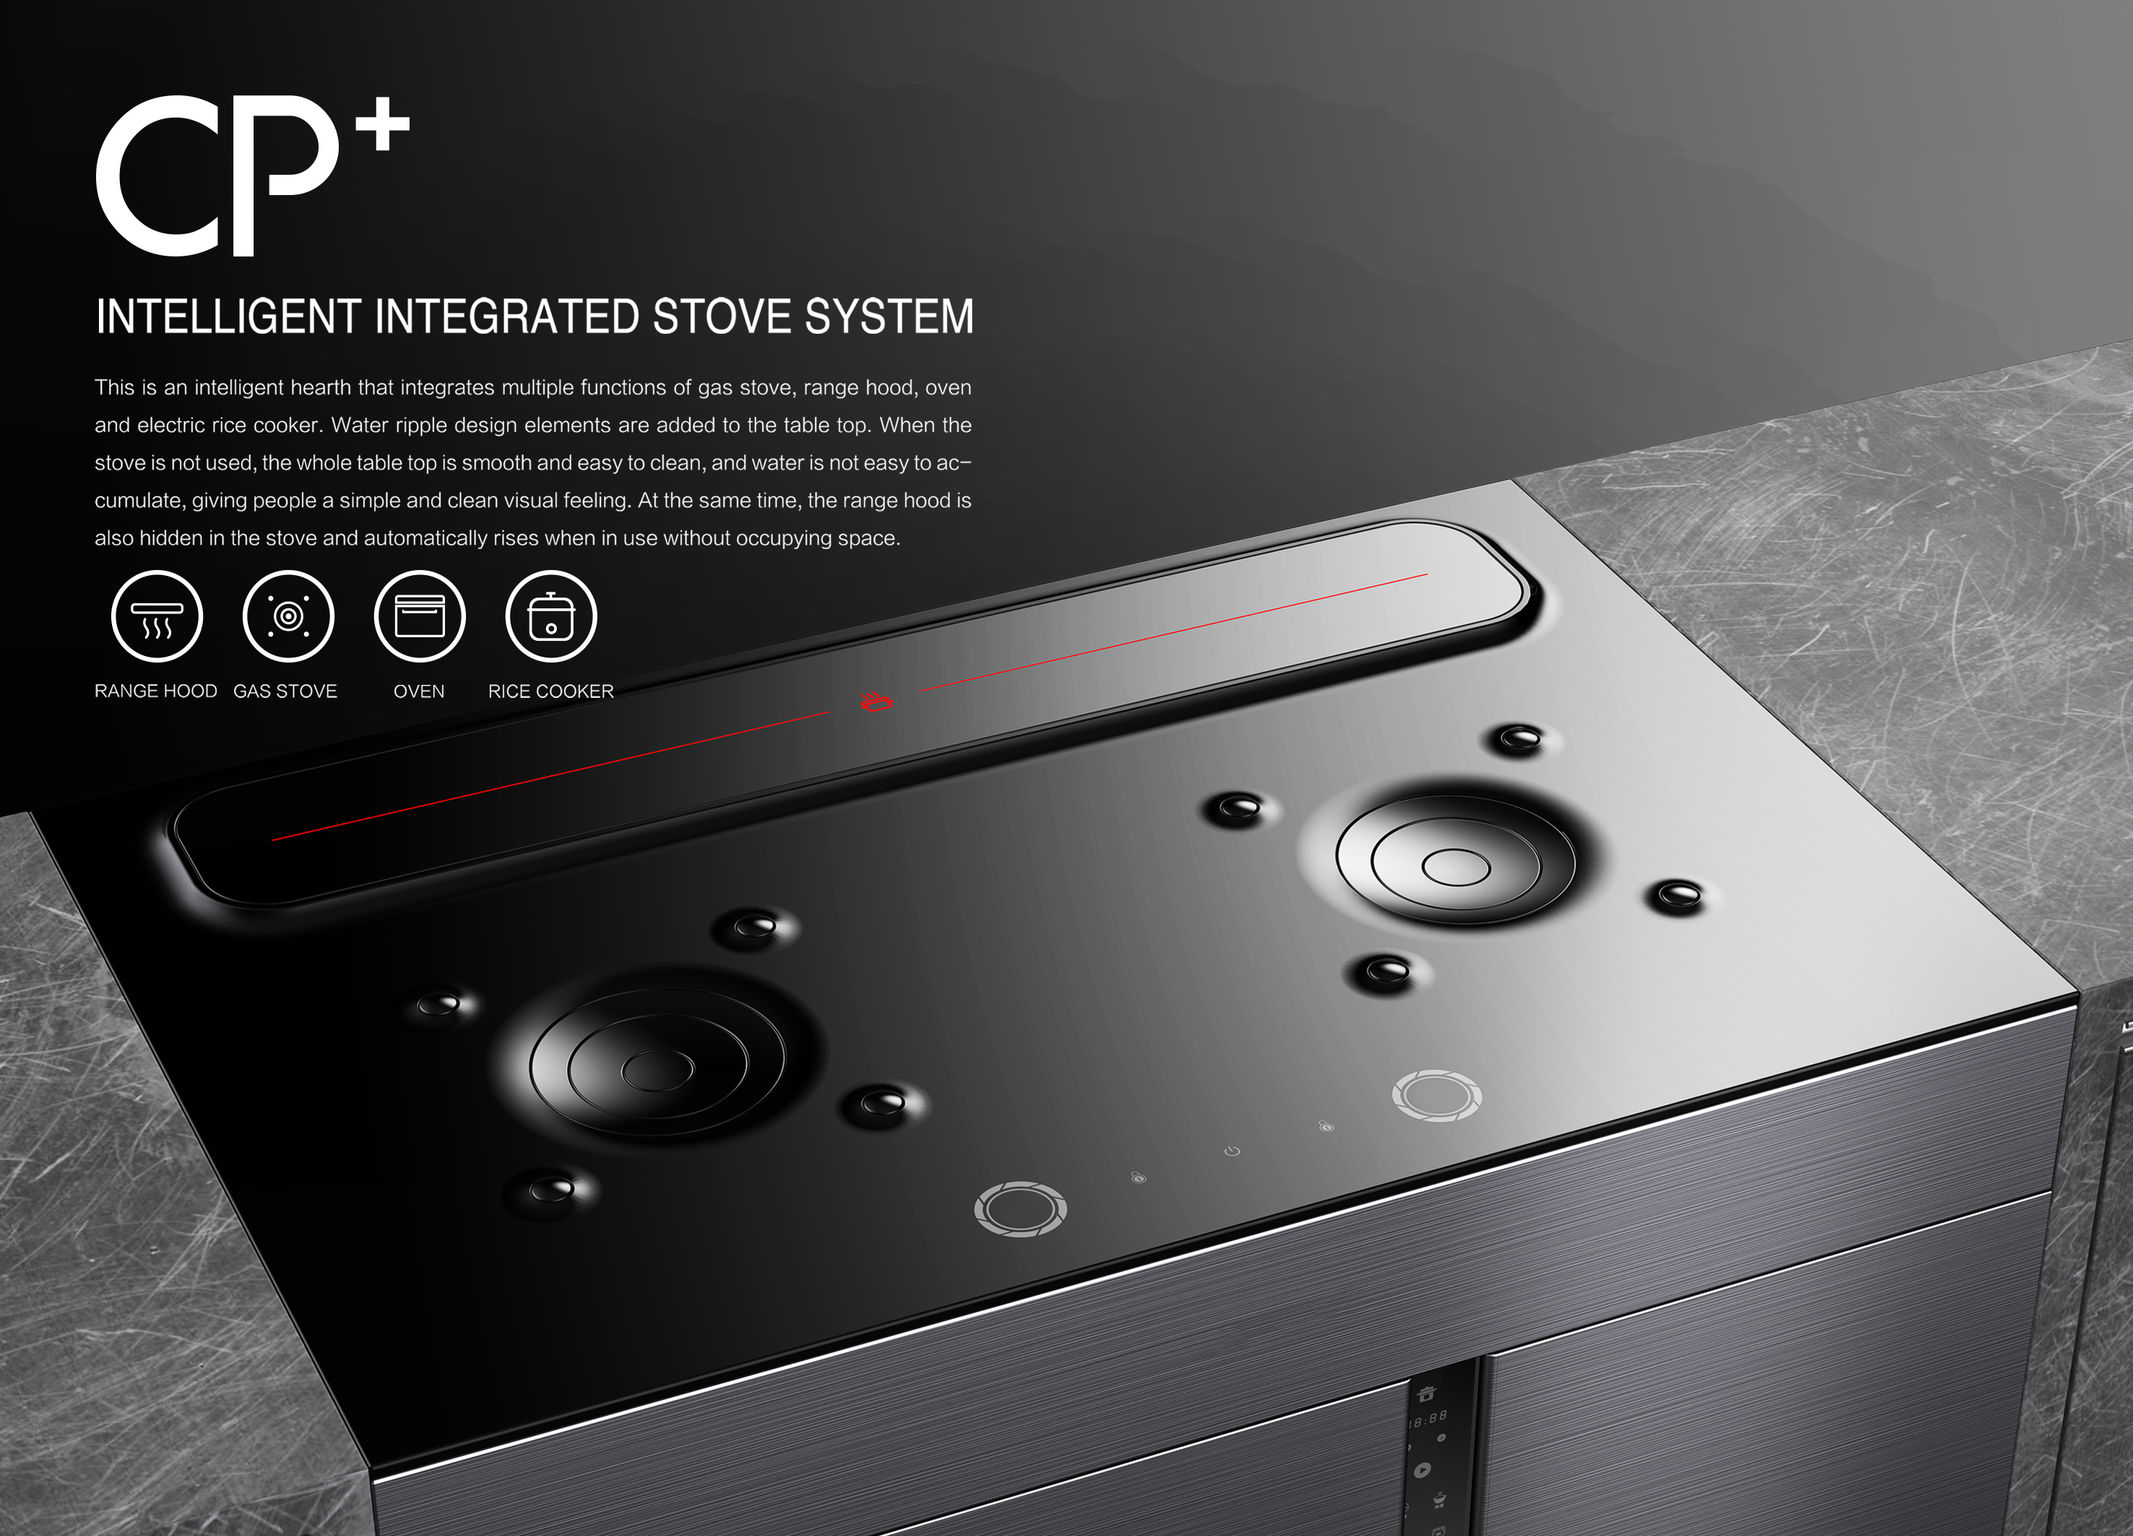 CP + intelligent integrated stove system